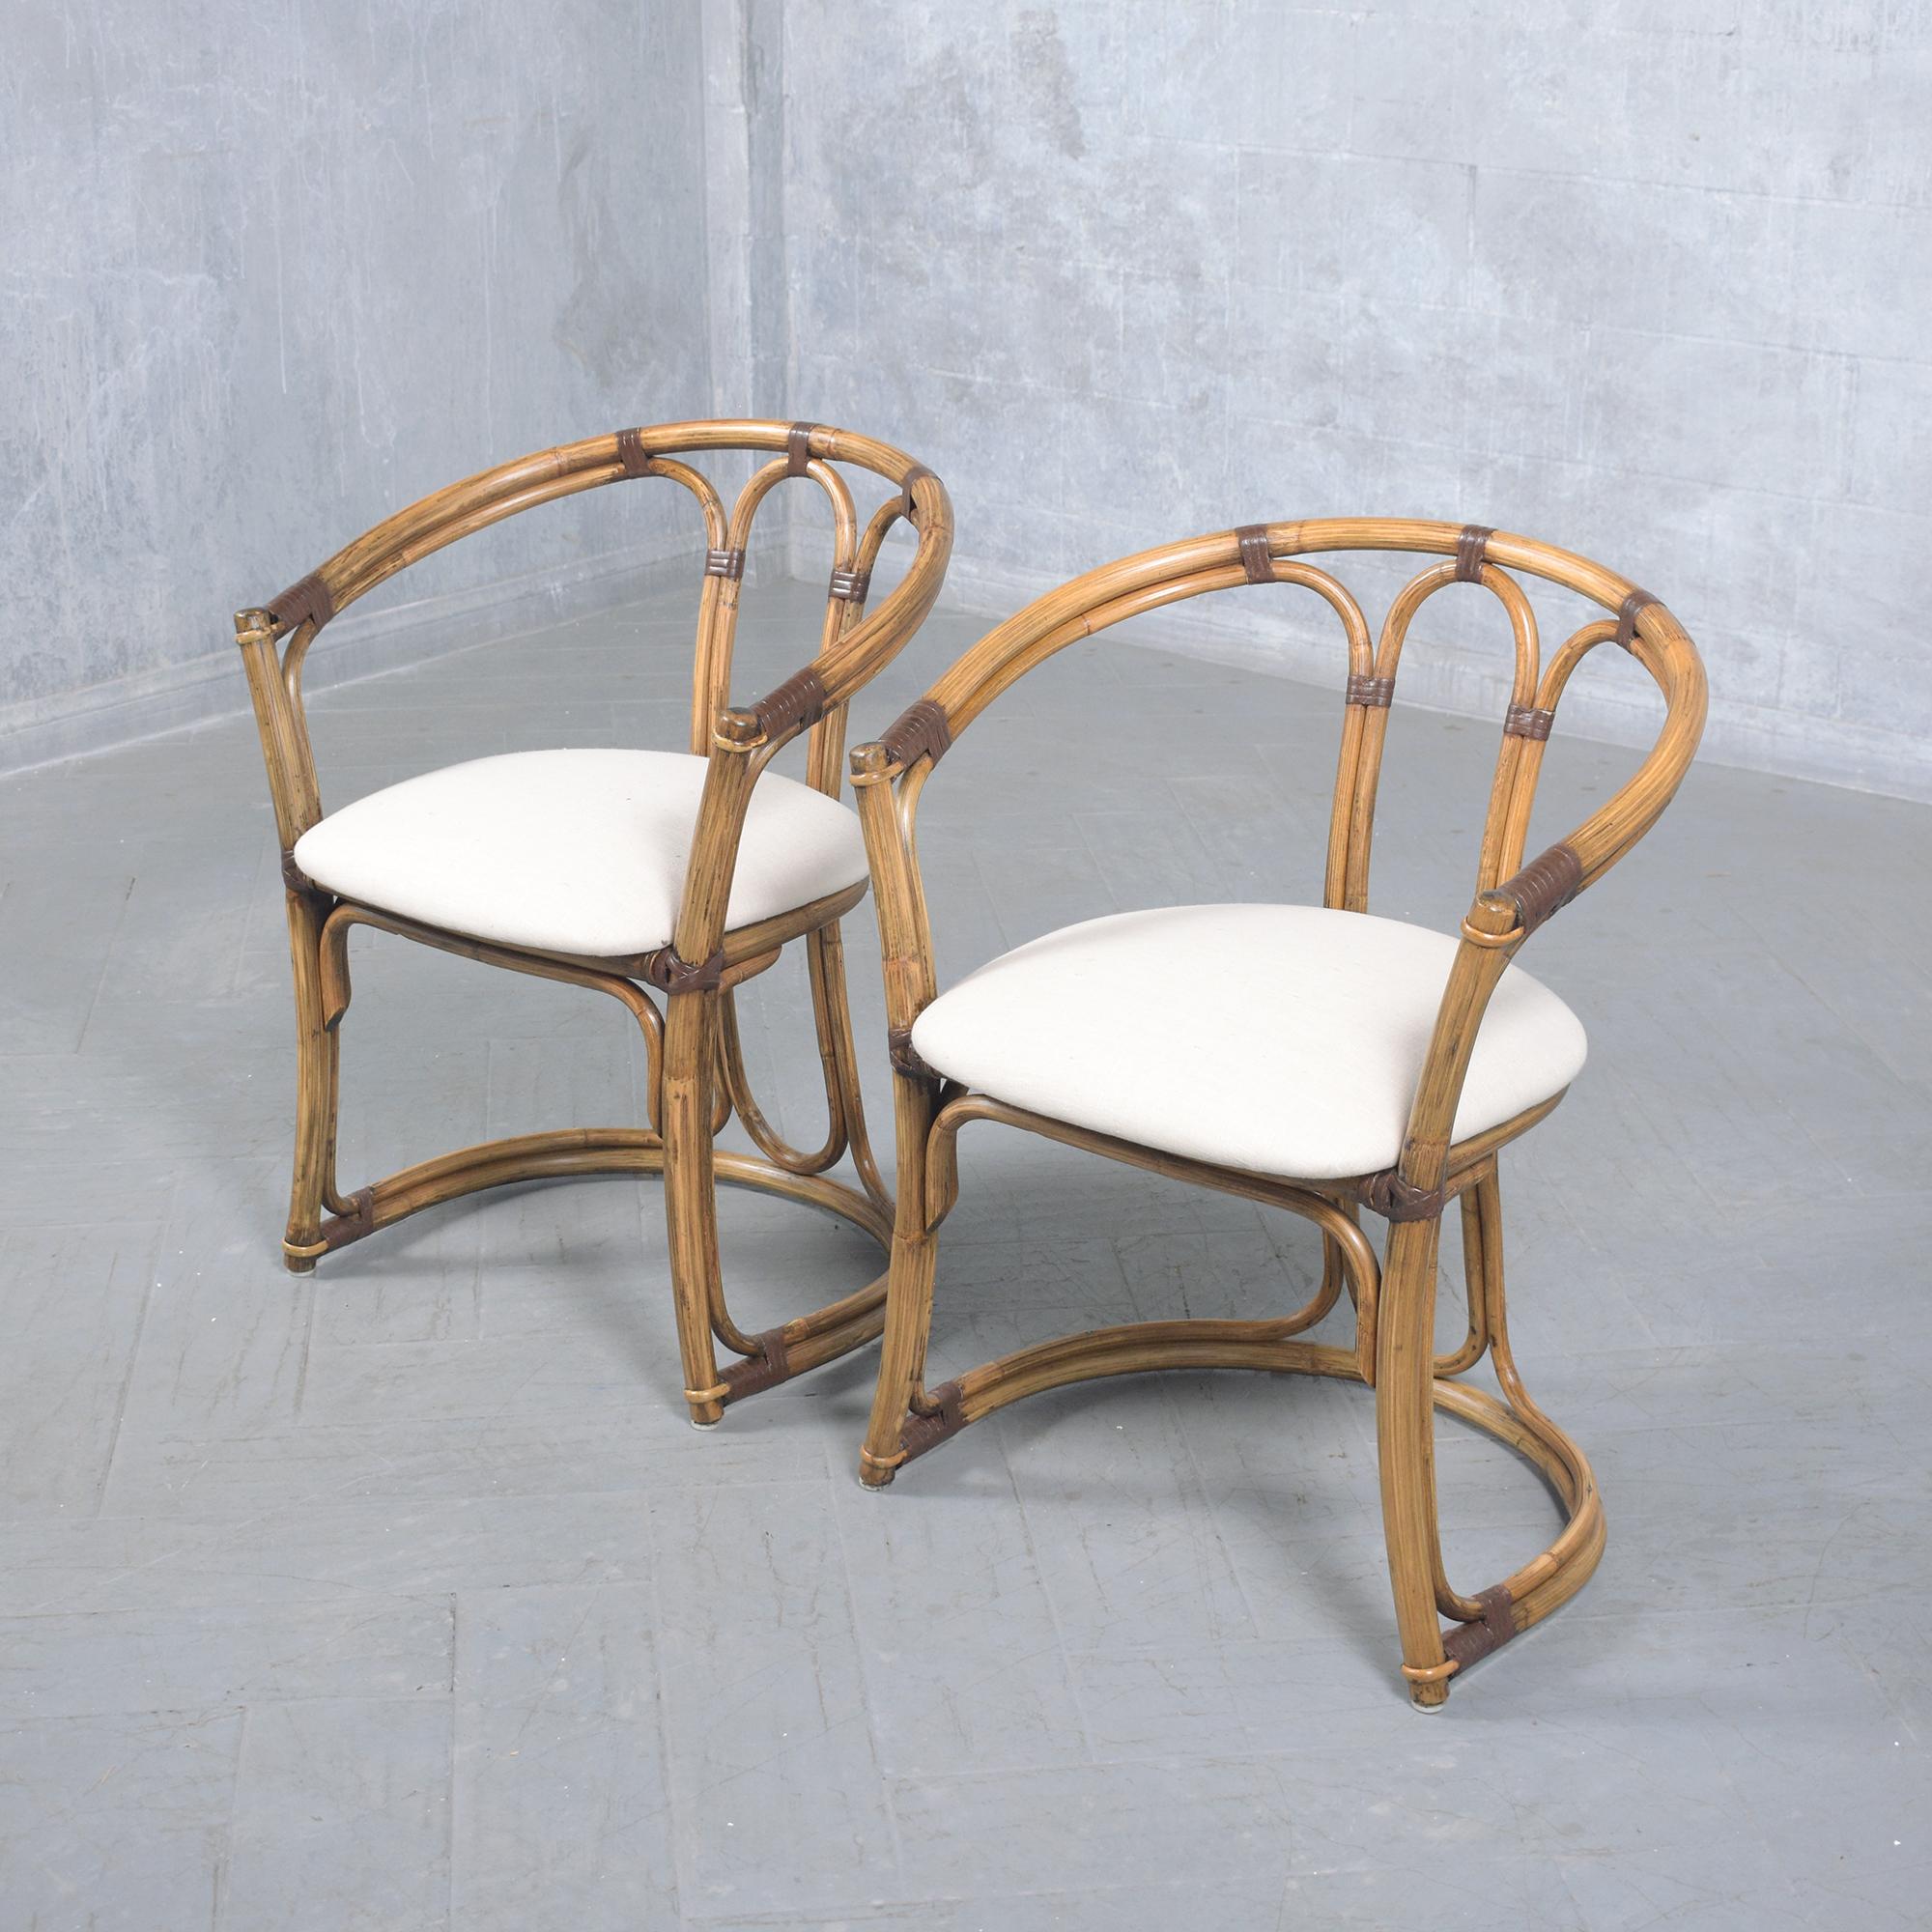 Carved Restored Vintage Bamboo Barrel Armchairs - Set of Four For Sale